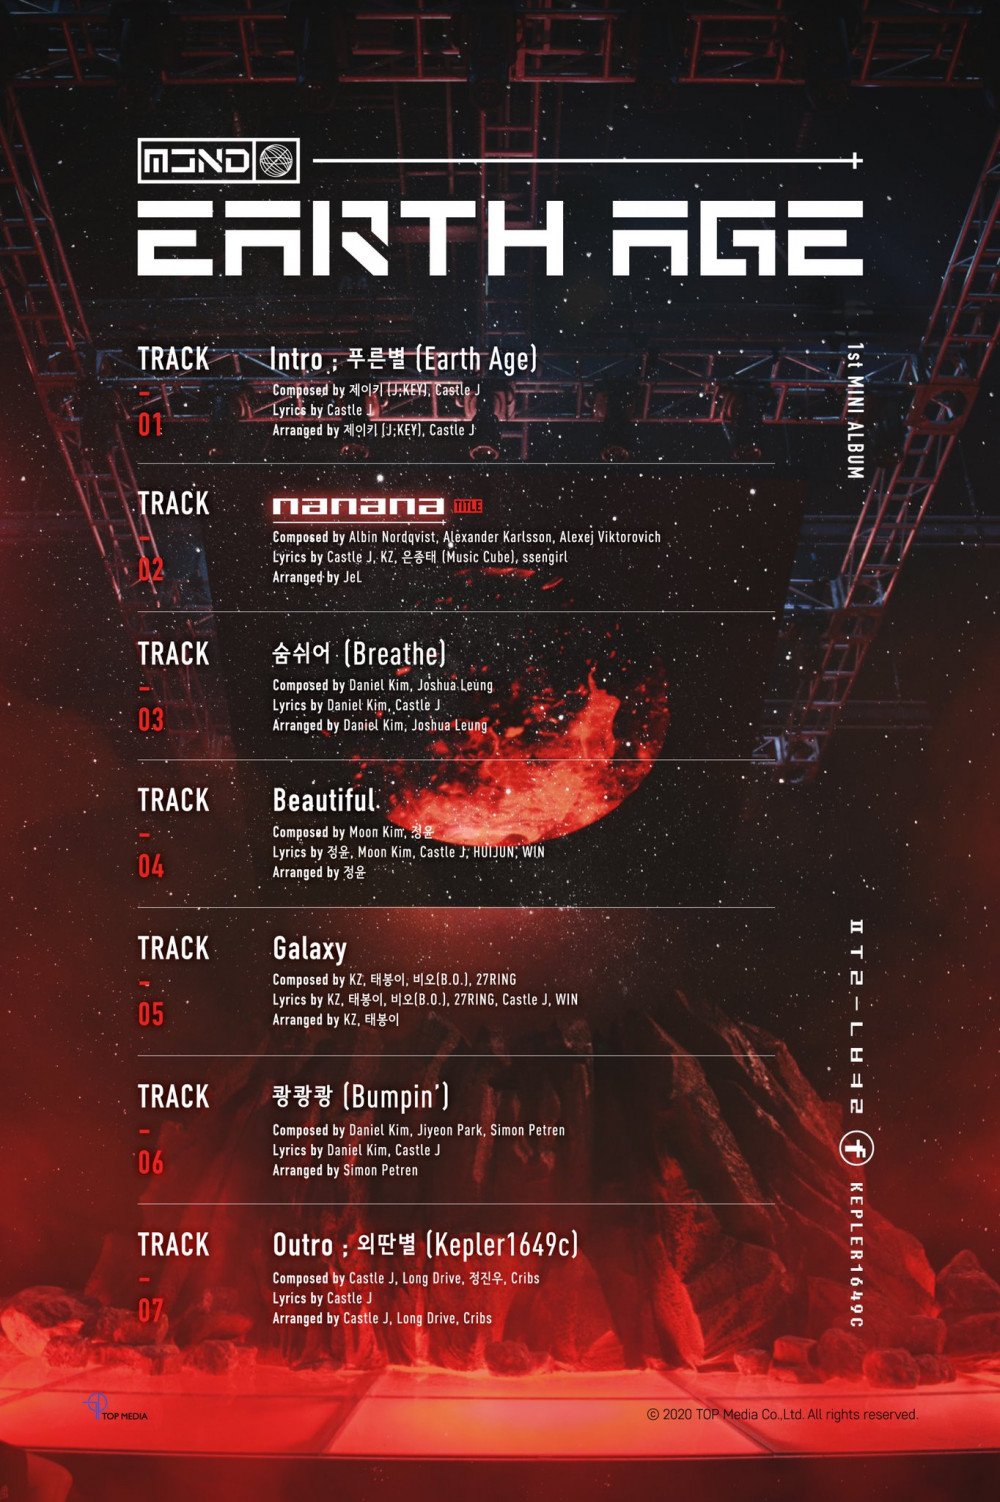 MCND Reveals Track List for First Mini Album 'Earth Age'